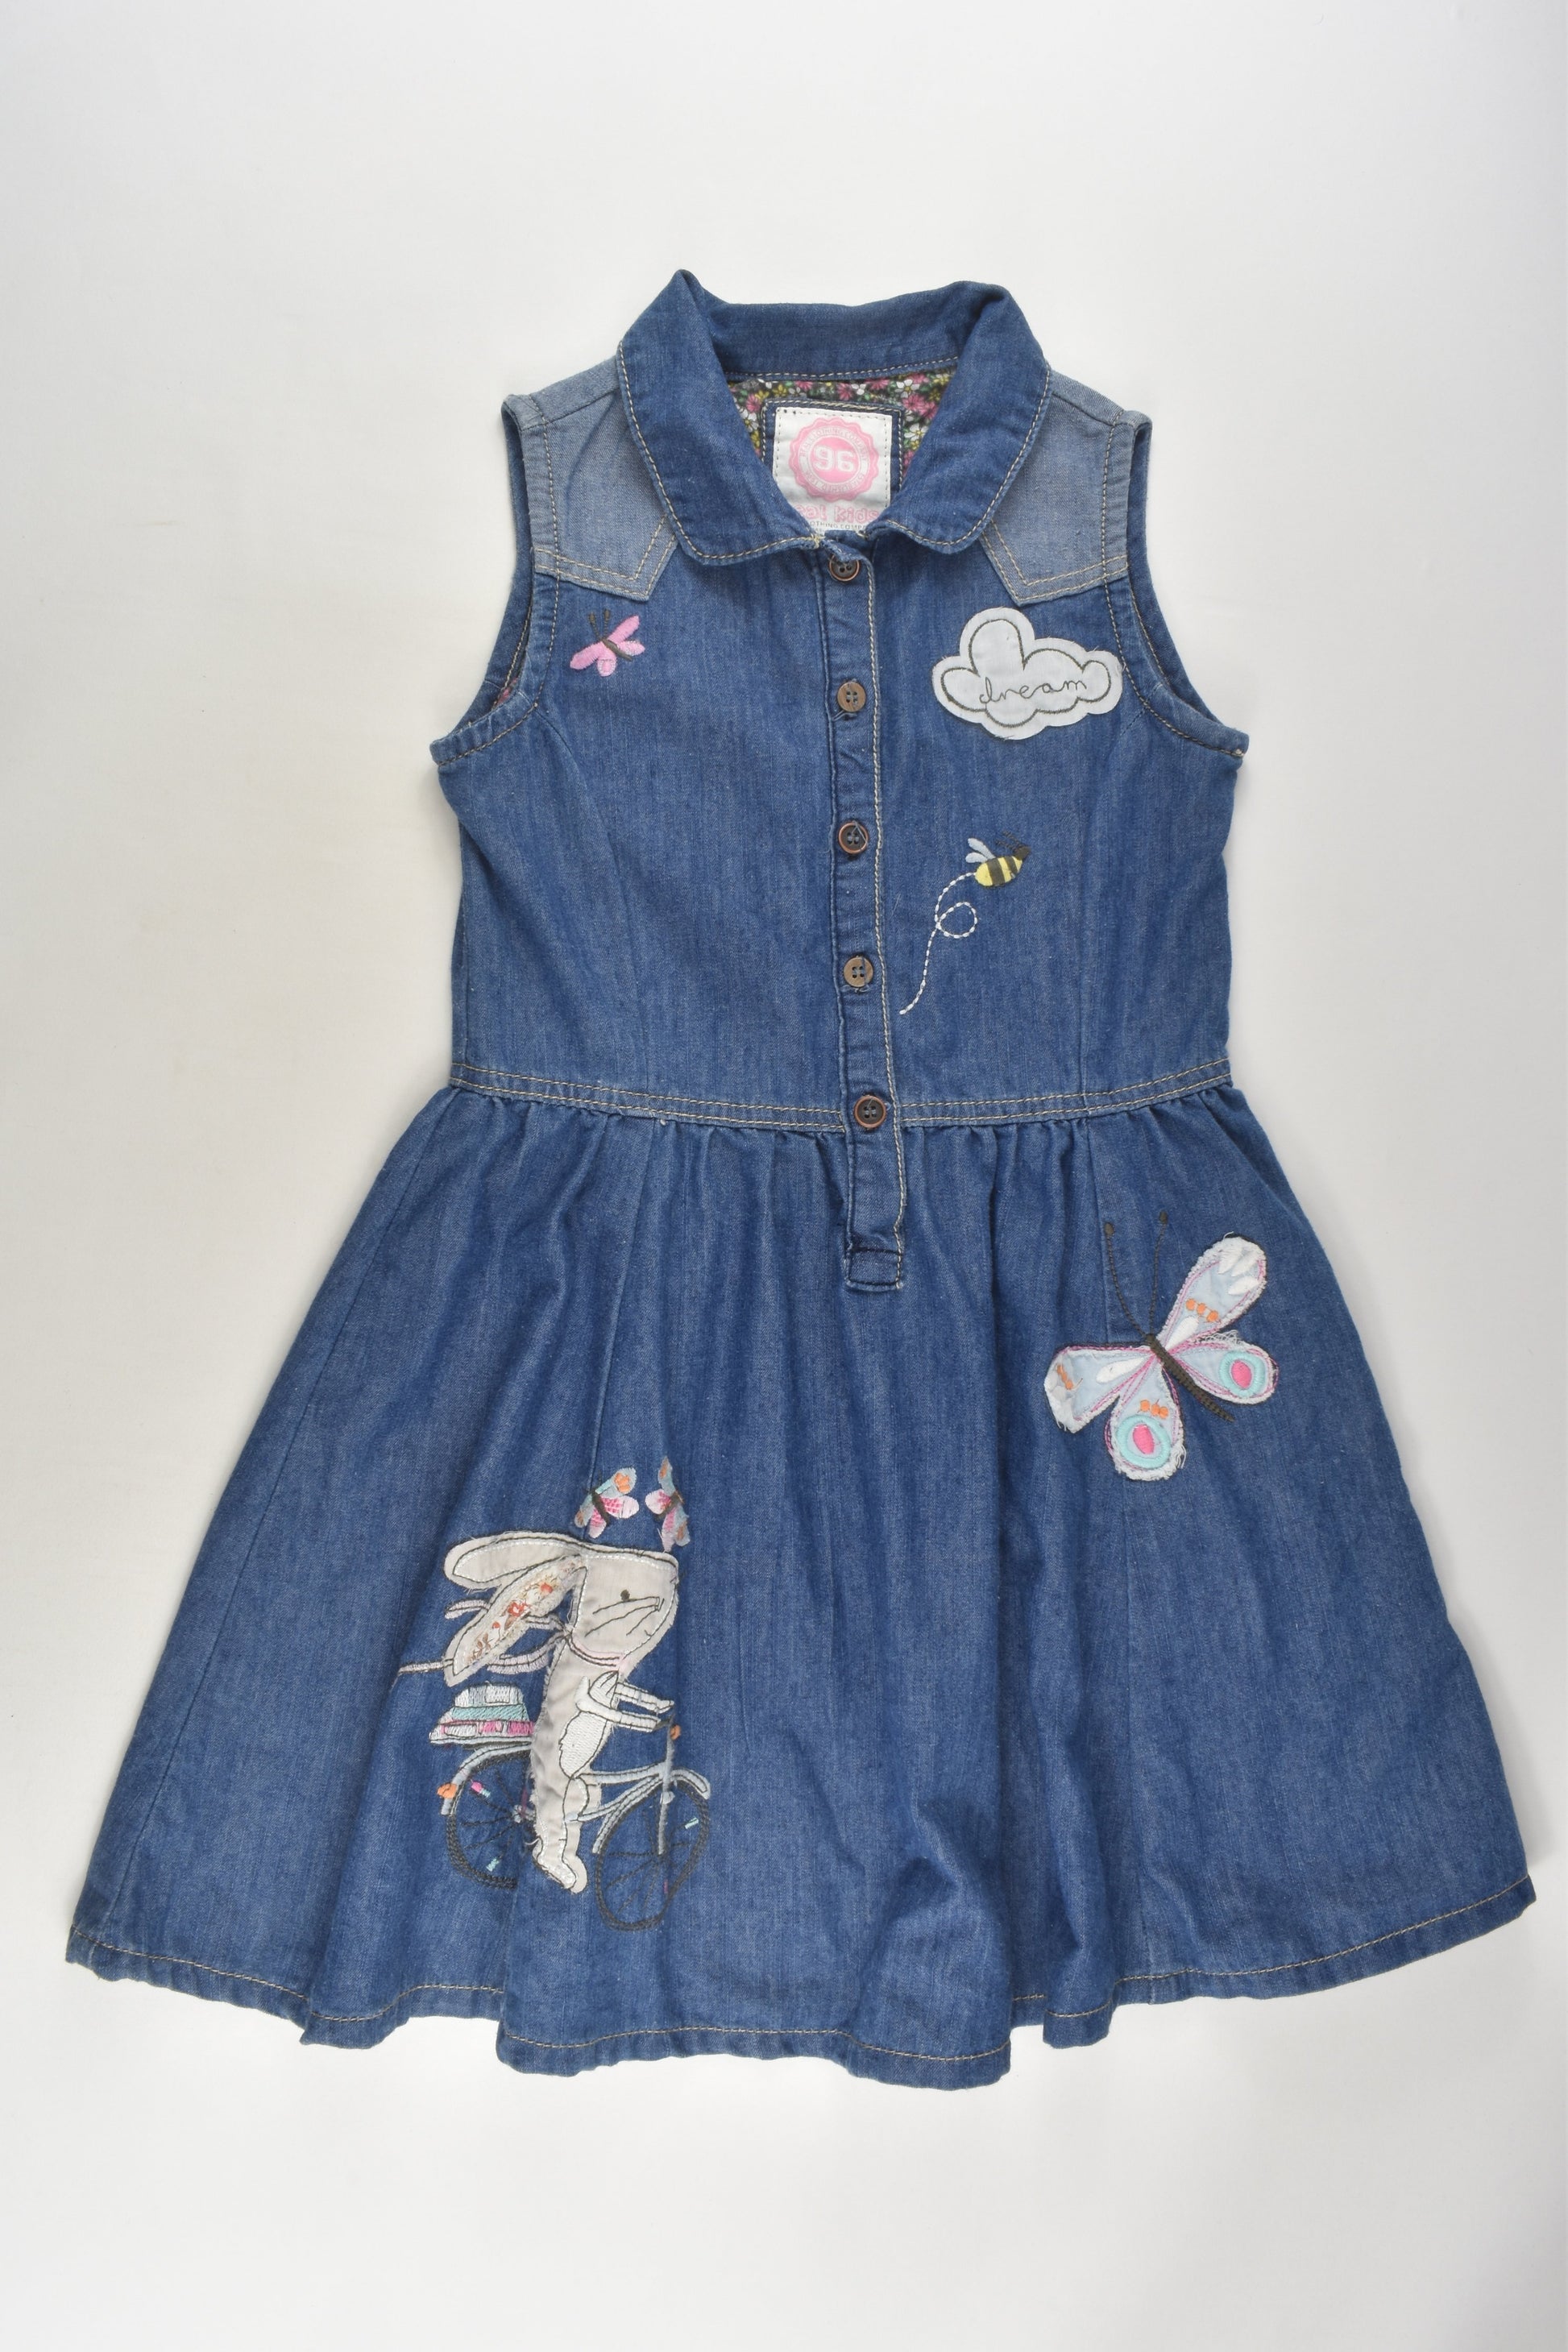 Real Kids Size 7-8 Butterflies and more Denim Dress